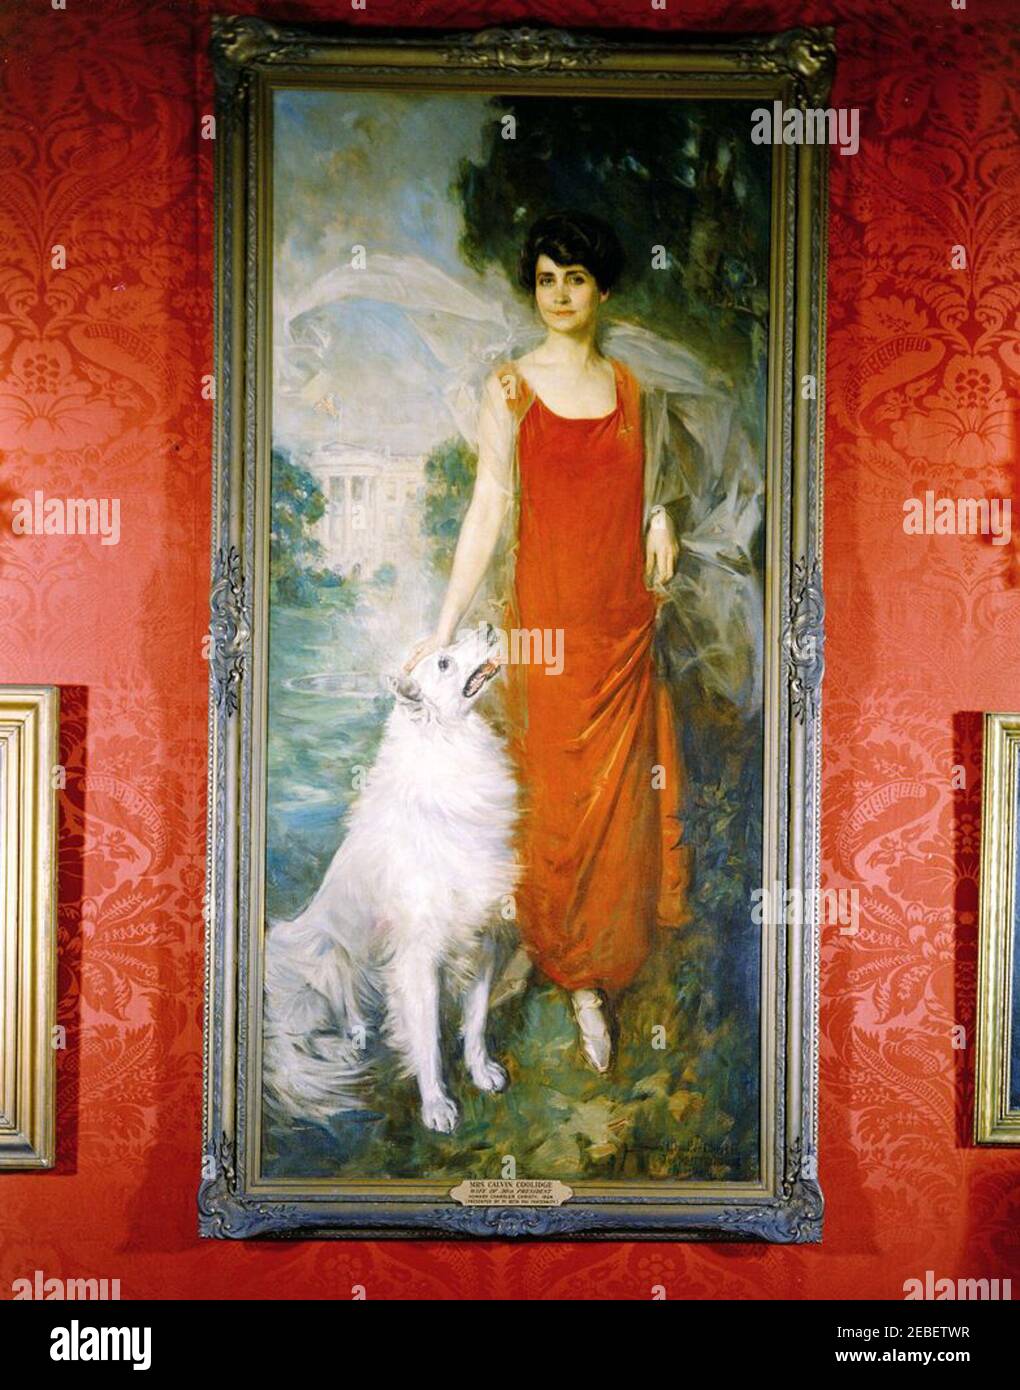 White House paintings, The Cup of Tea by Mary Cassatt, portraits of Dwight D. Eisenhower, Mamie Doud Eisenhower, Grace Coolidge, and Abraham Lincoln. Portrait of First Lady Grace Goodhue Coolidge (and the Coolidgesu0027 dog, Rob Roy) by Howard Chandler Christy, 1924, and a gift of Pi Beta Phi Fraternity. Red Room, White House, Washington, D.C. Stock Photo